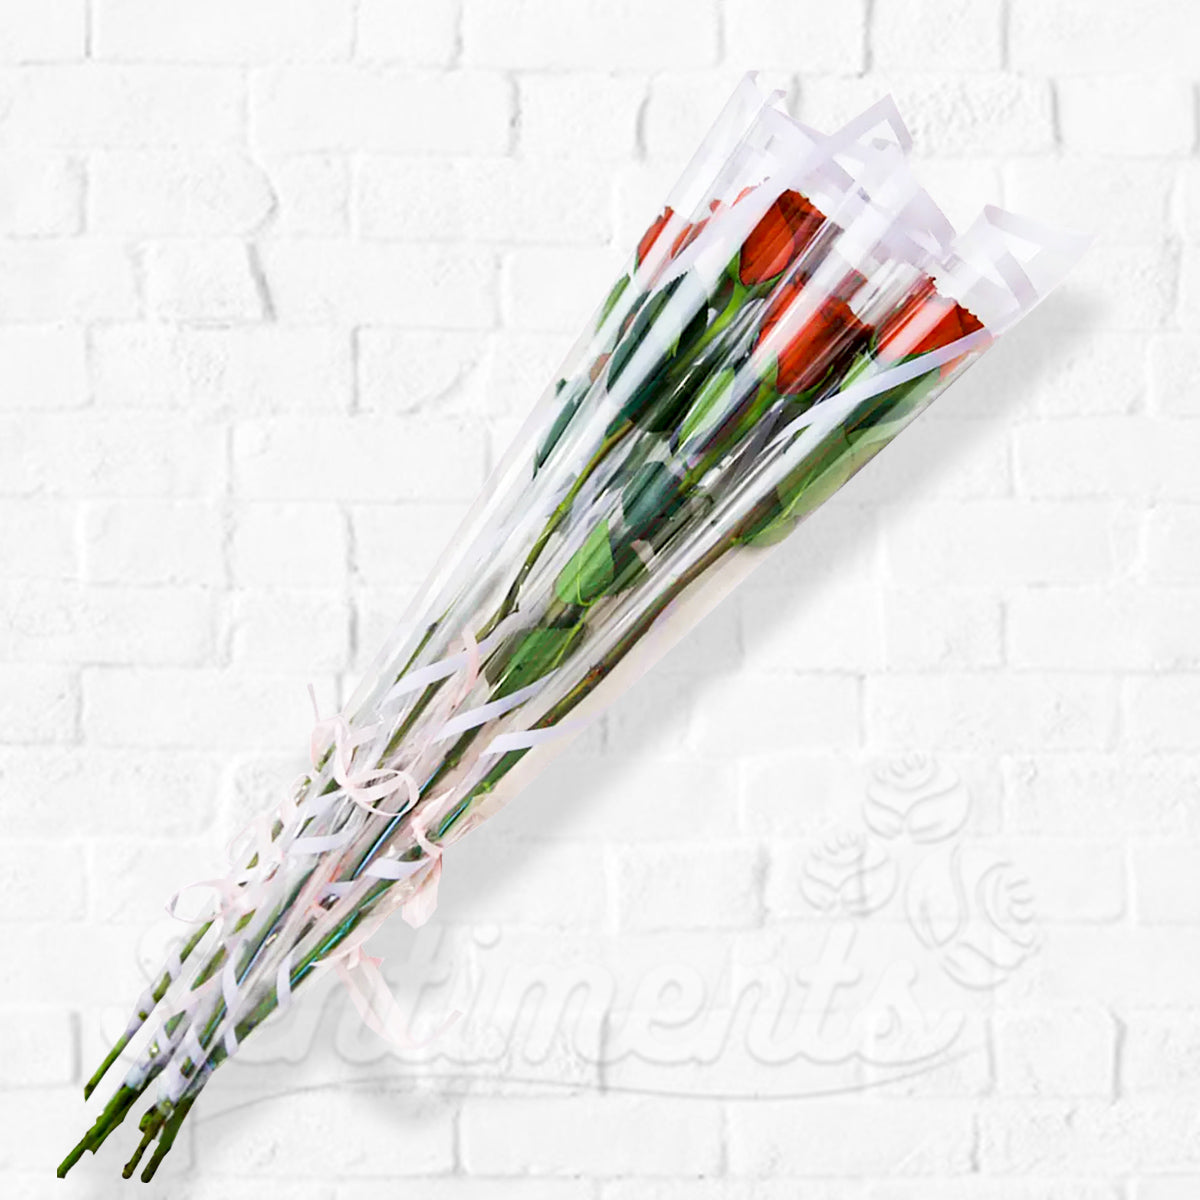 Single Wrapped Red Roses